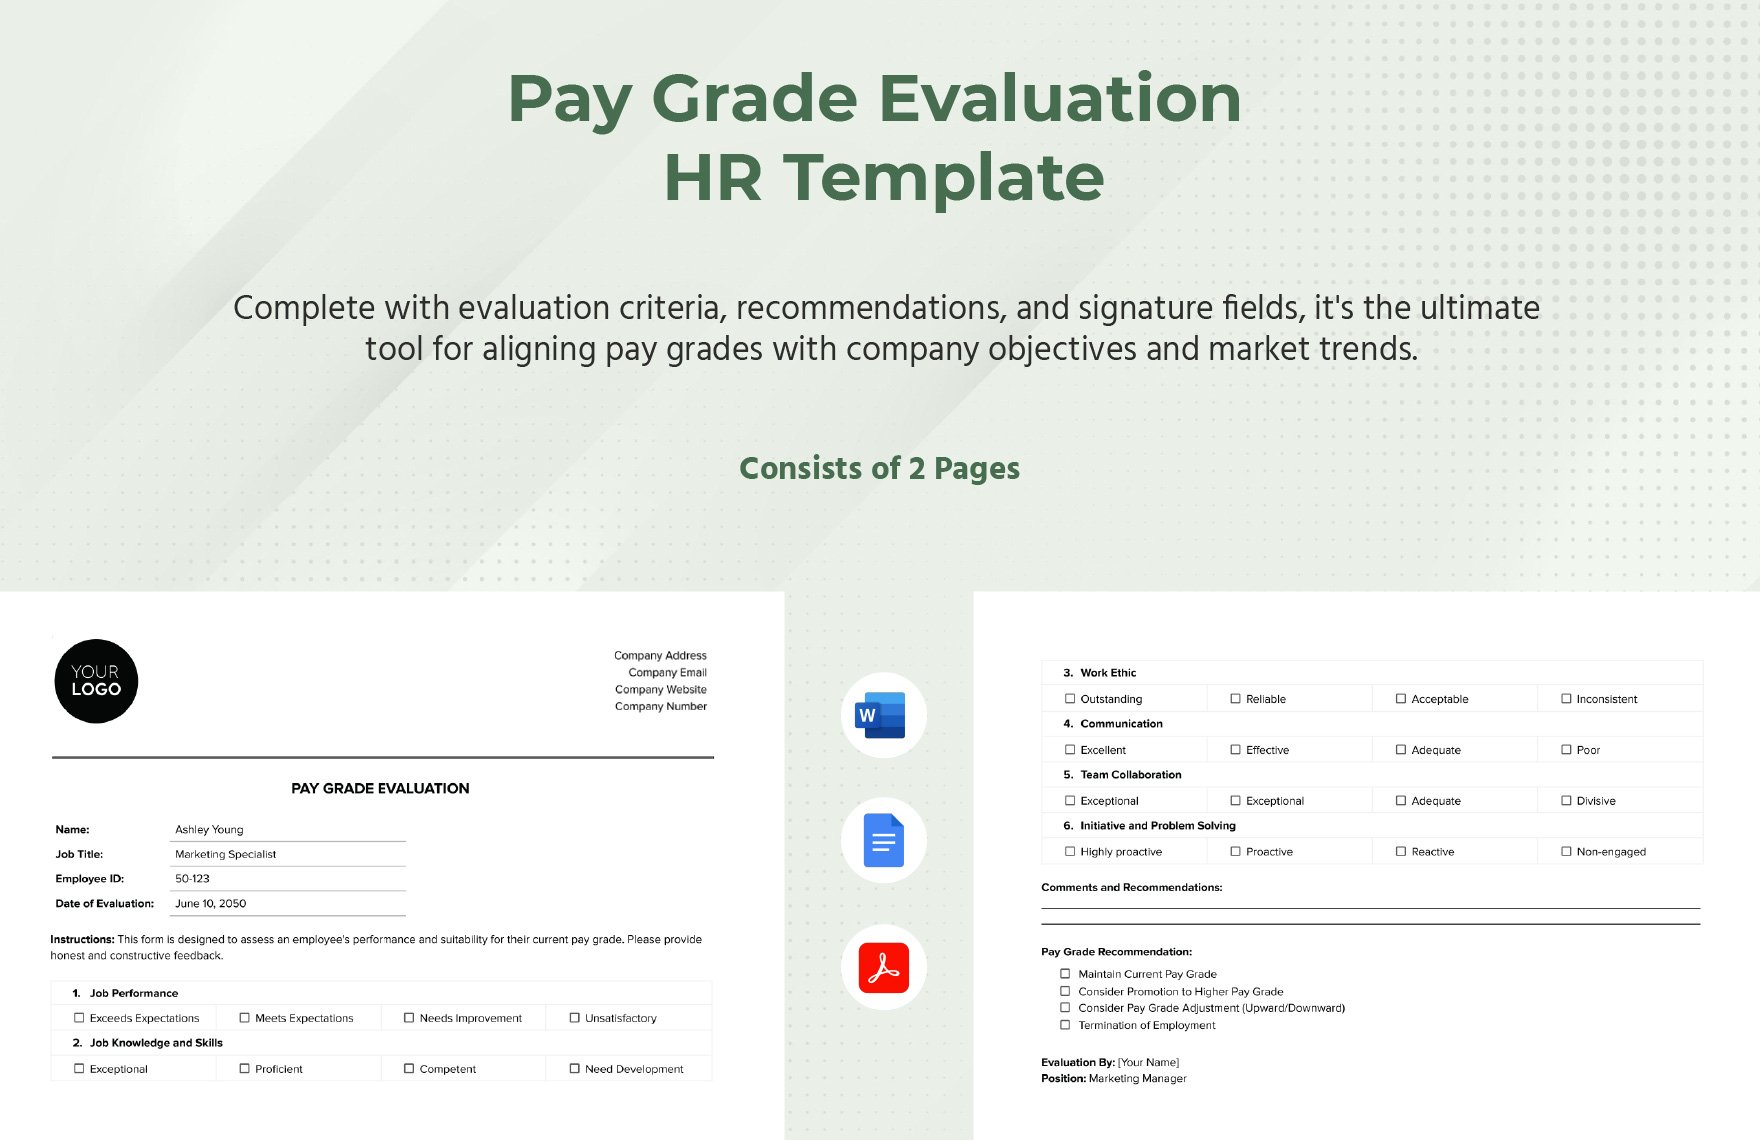 Pay Grade Evaluation HR Template